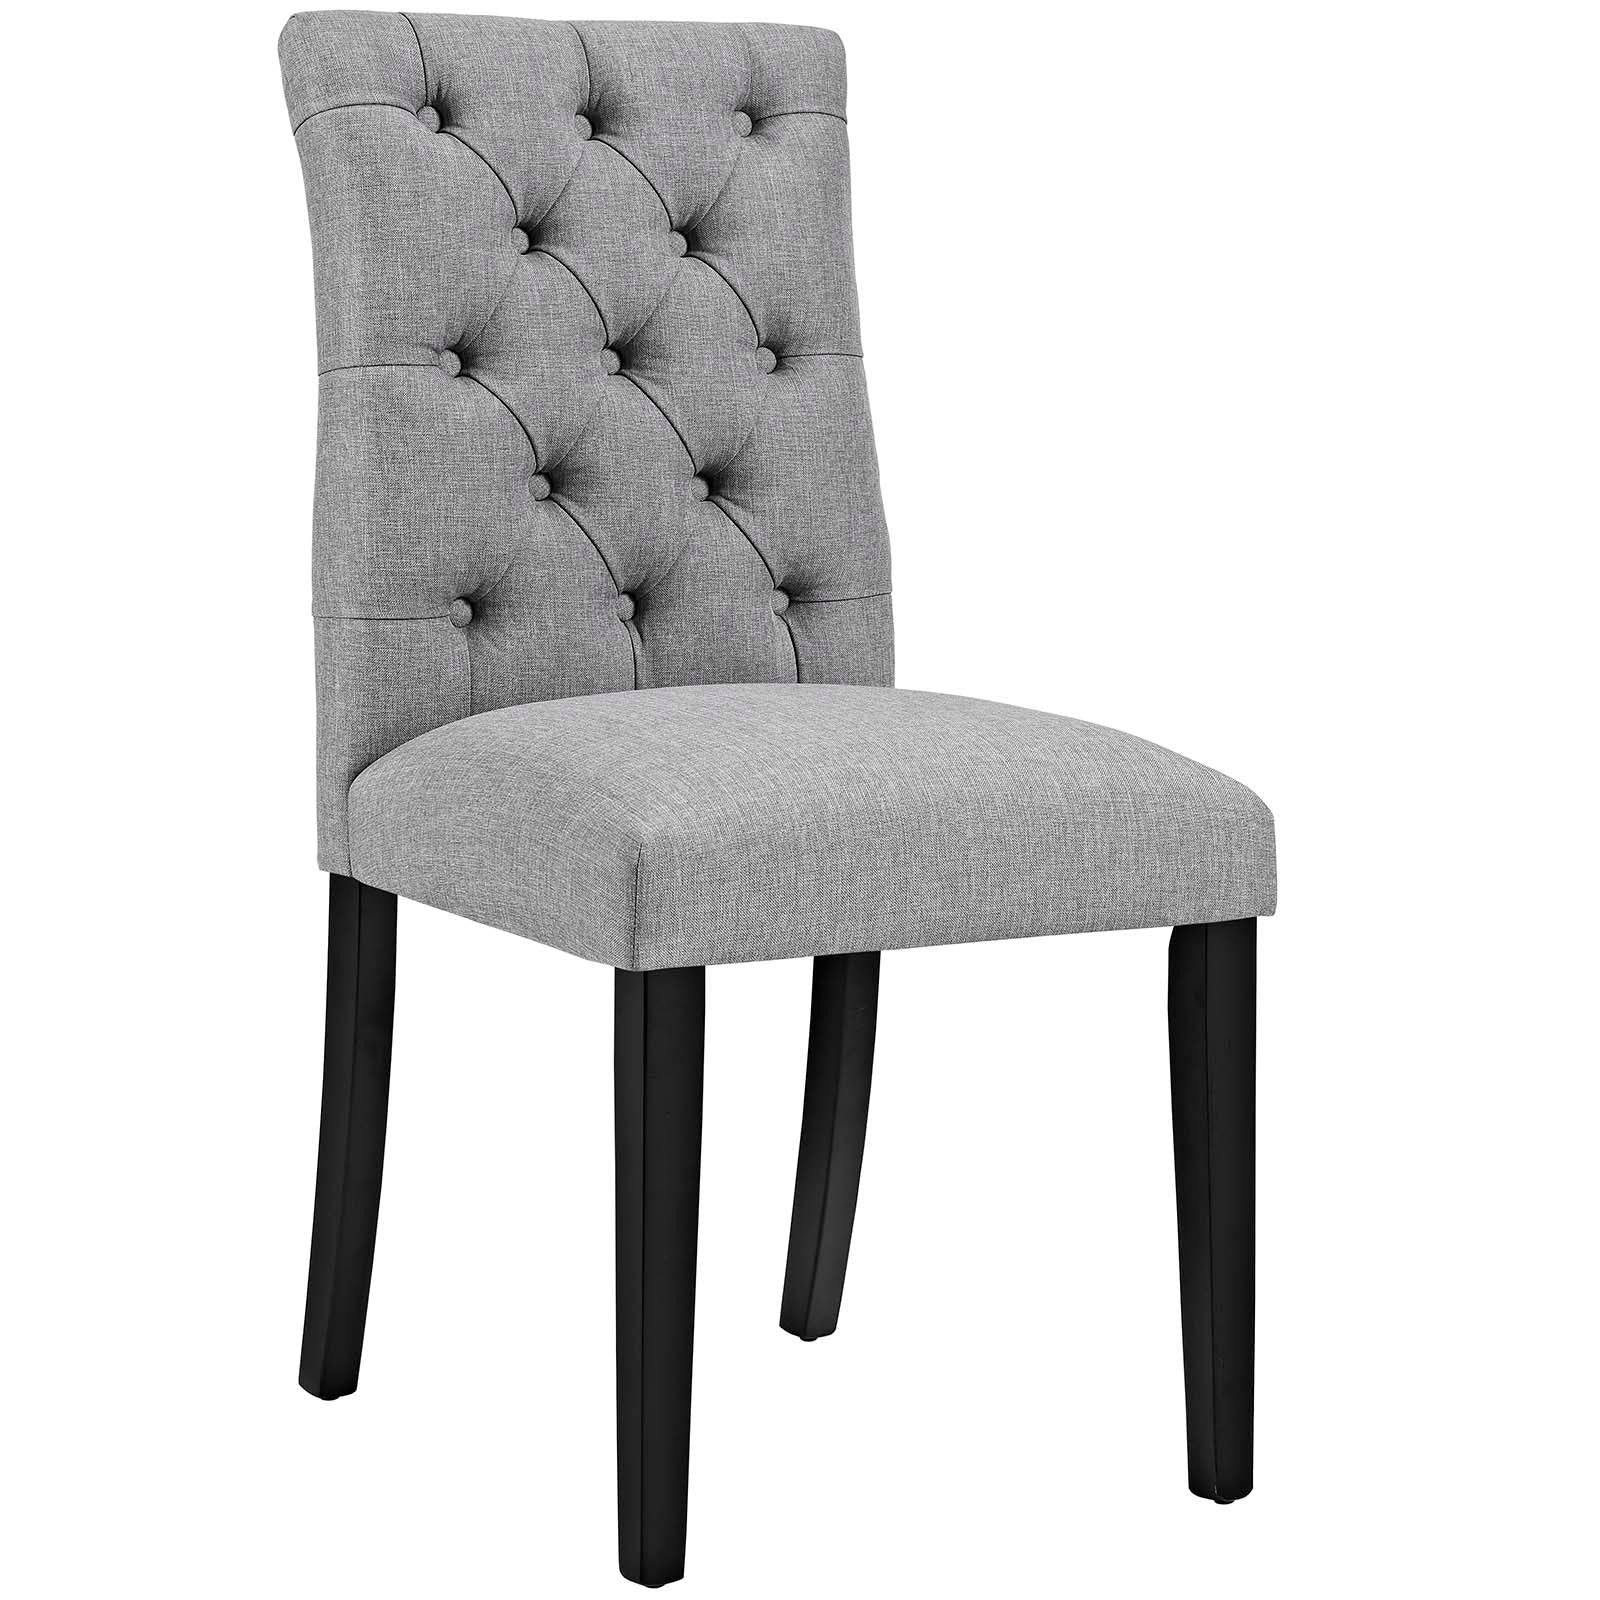 Duchess Dining Chair Fabric Set of 2 - East Shore Modern Home Furnishings